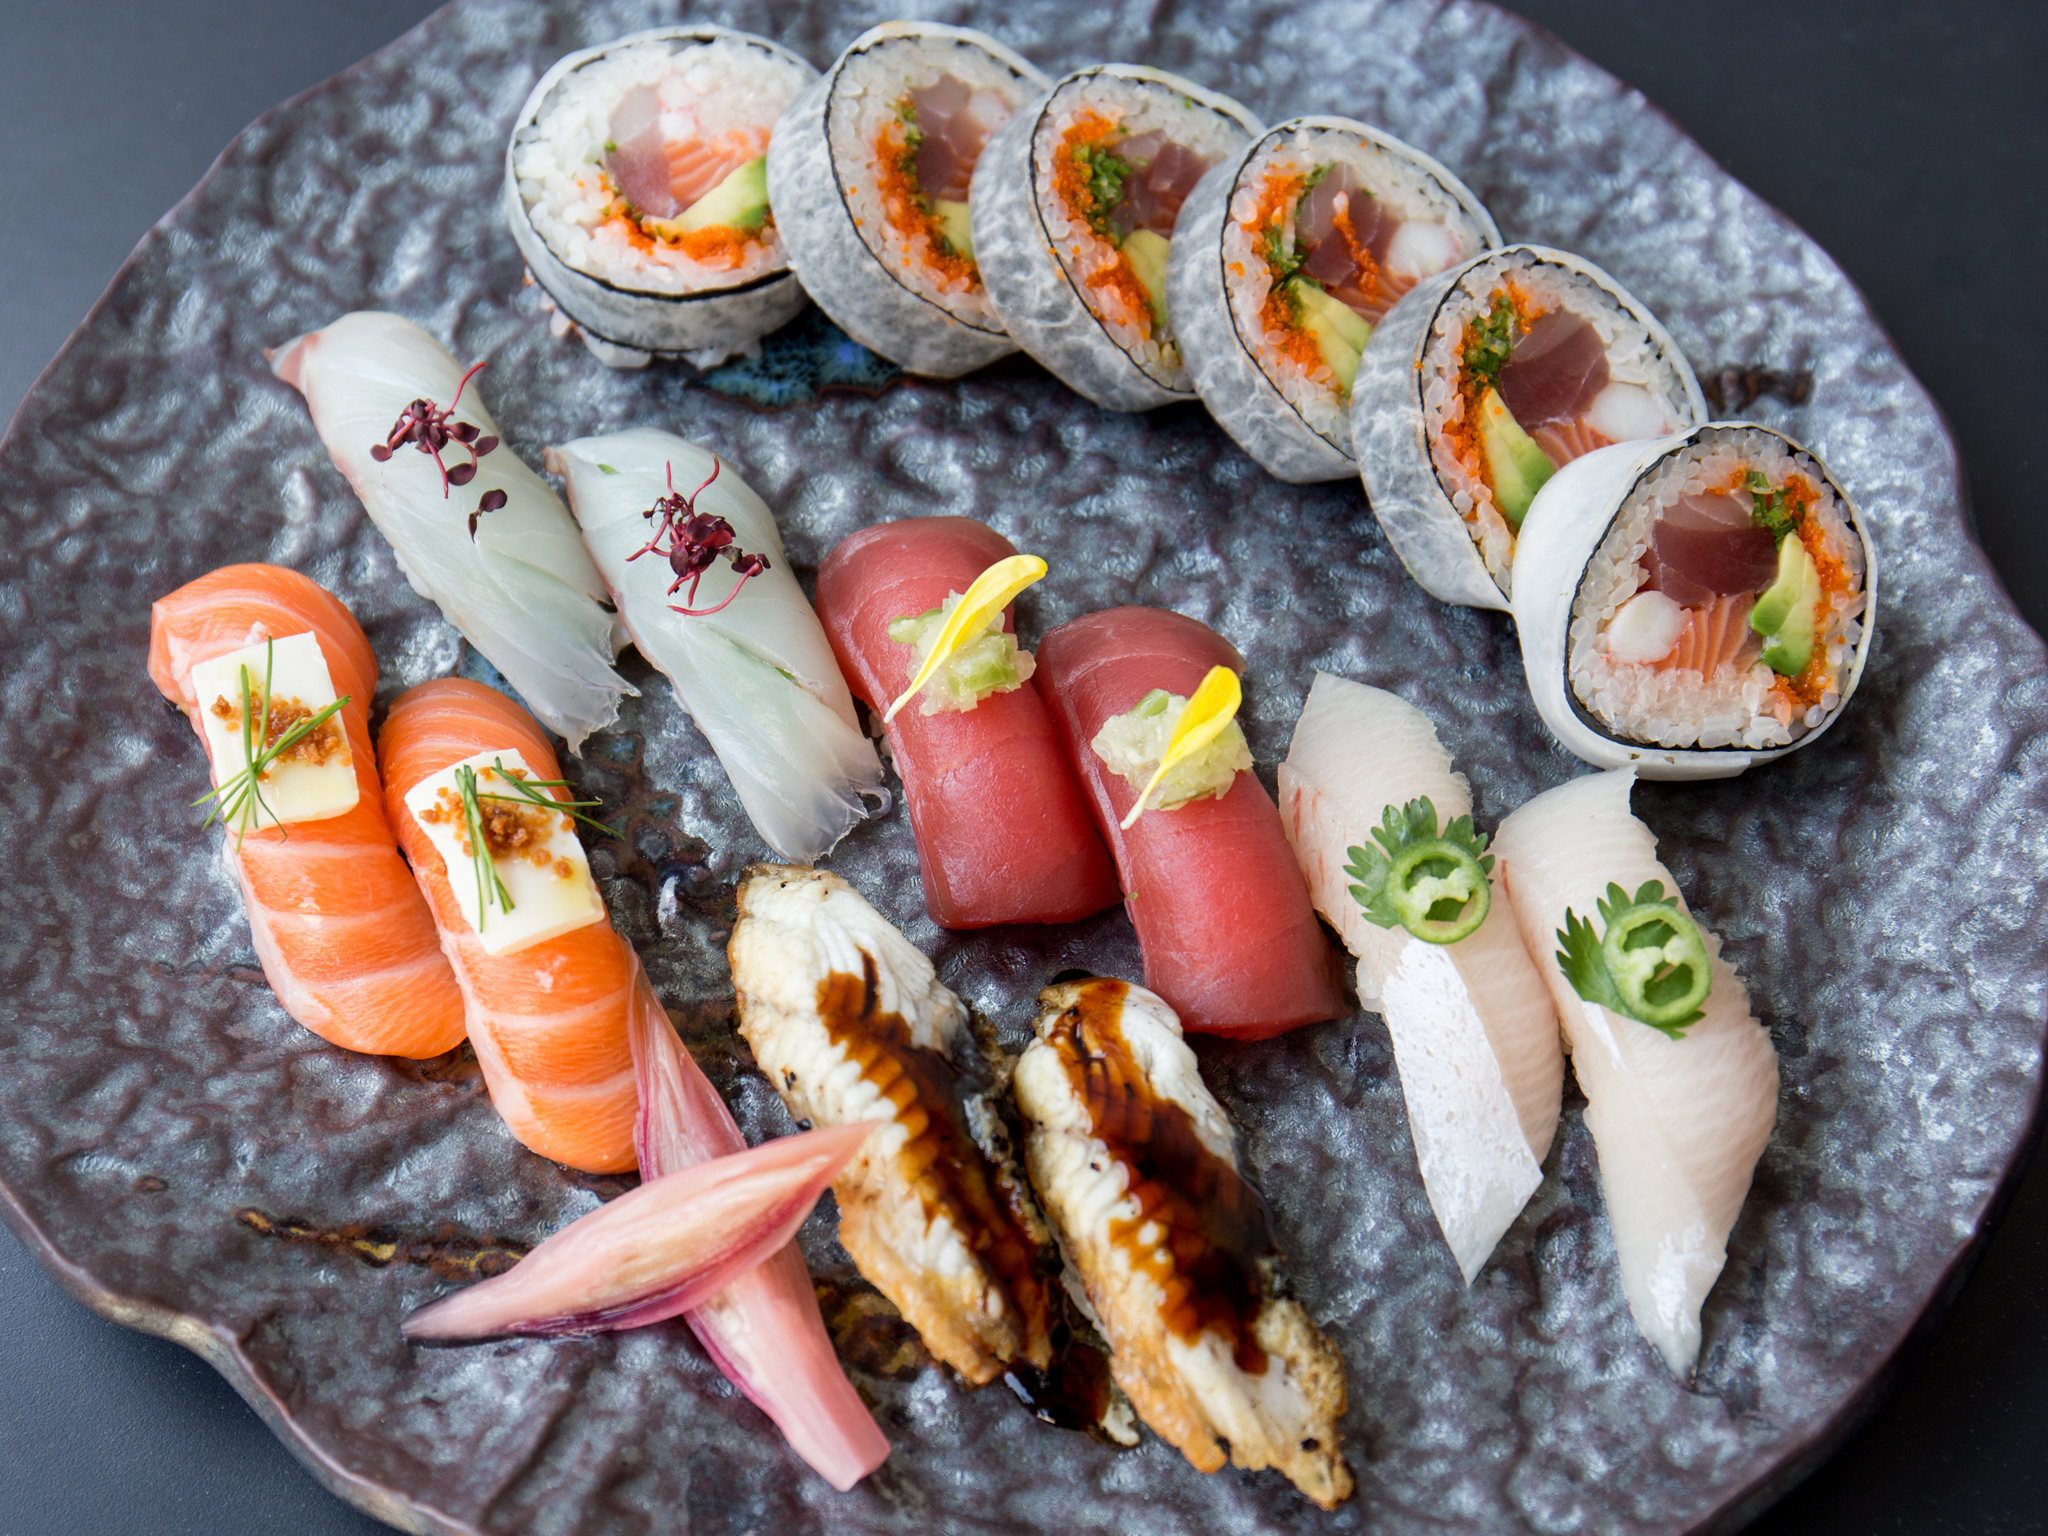 London’s Best Sushi Restaurants 20 Places To Maki Your Day TrendRadars